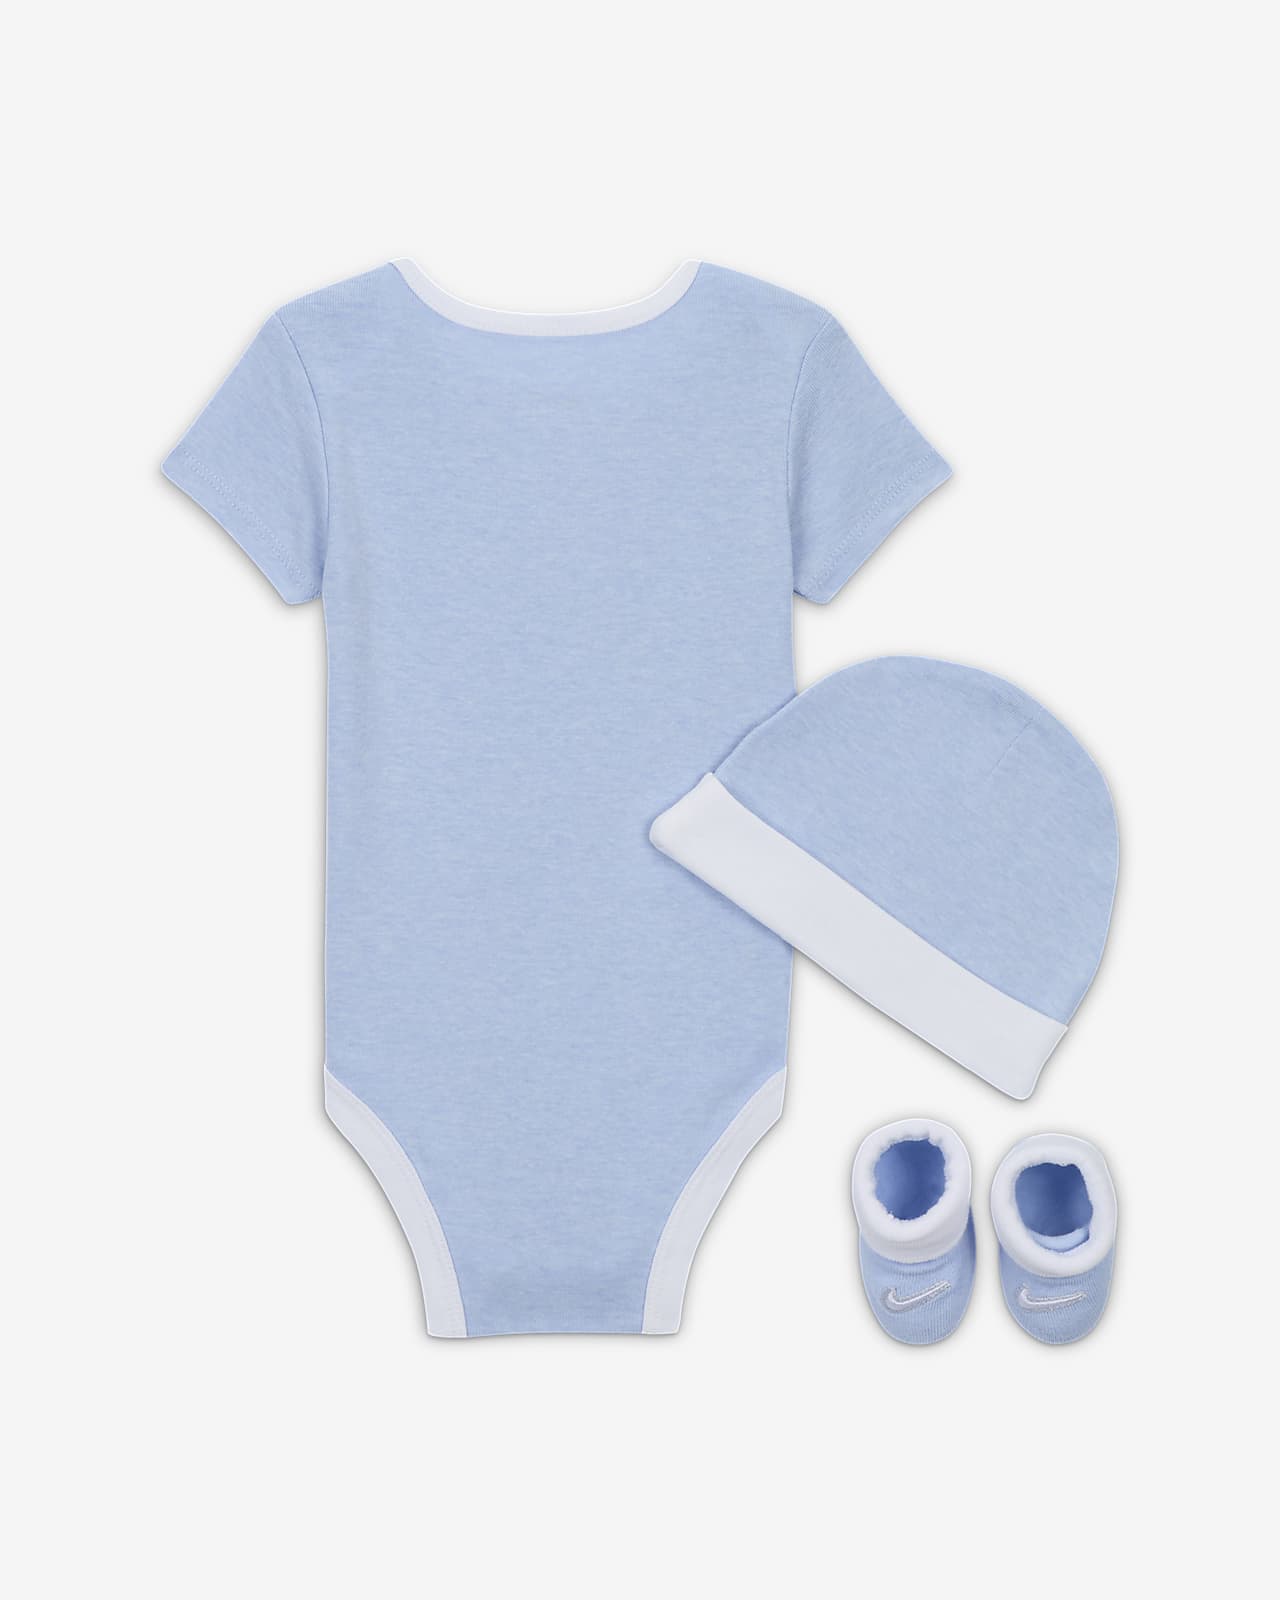 Nike Baby (0-6M) Hat and Booties Set.